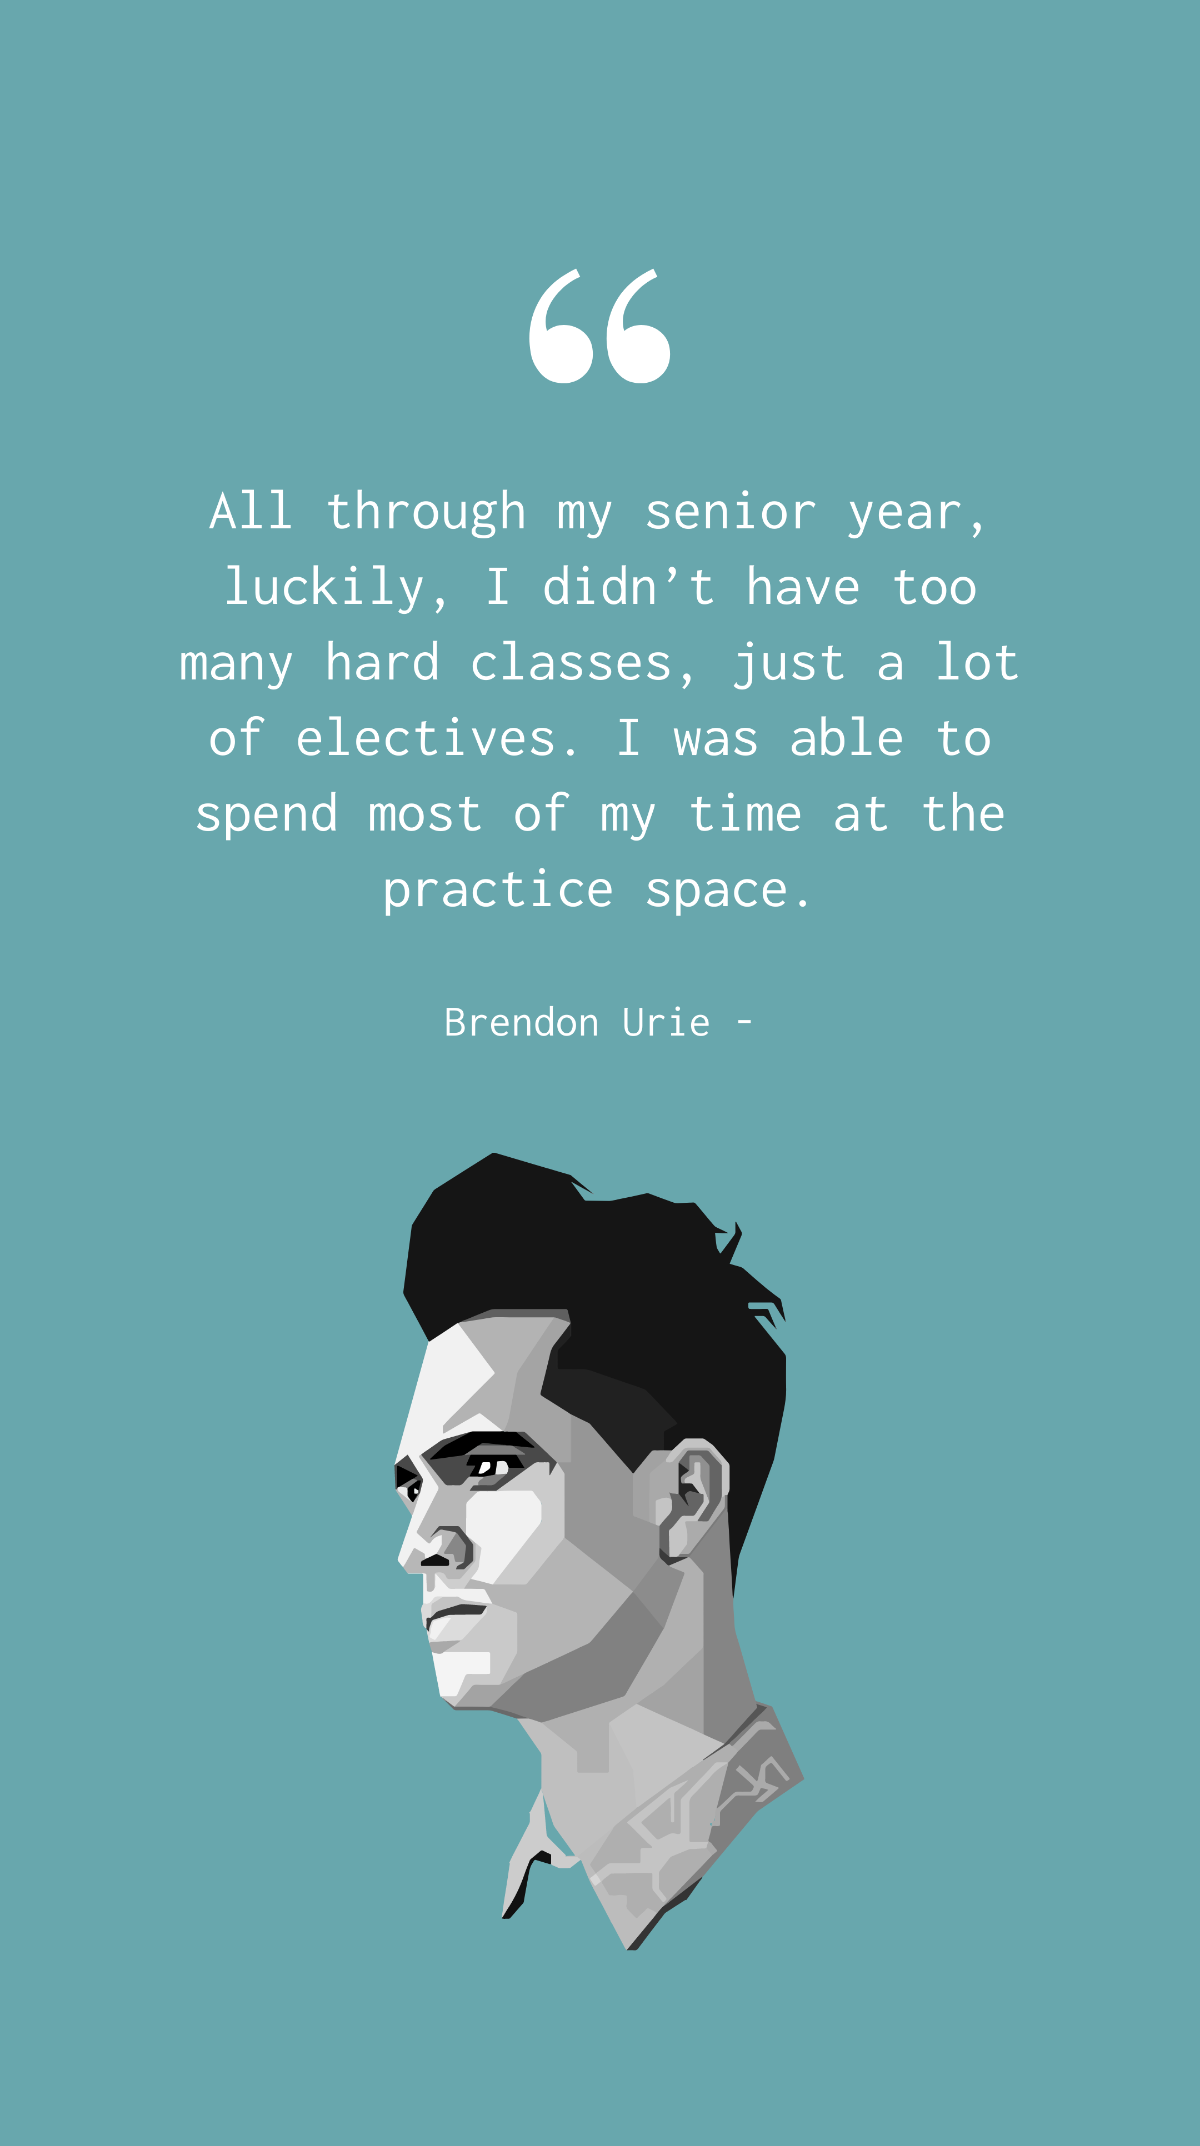 Brendon Urie - All through my senior year, luckily, I didn’t have too many hard classes, just a lot of electives. I was able to spend most of my time at the practice space. Template